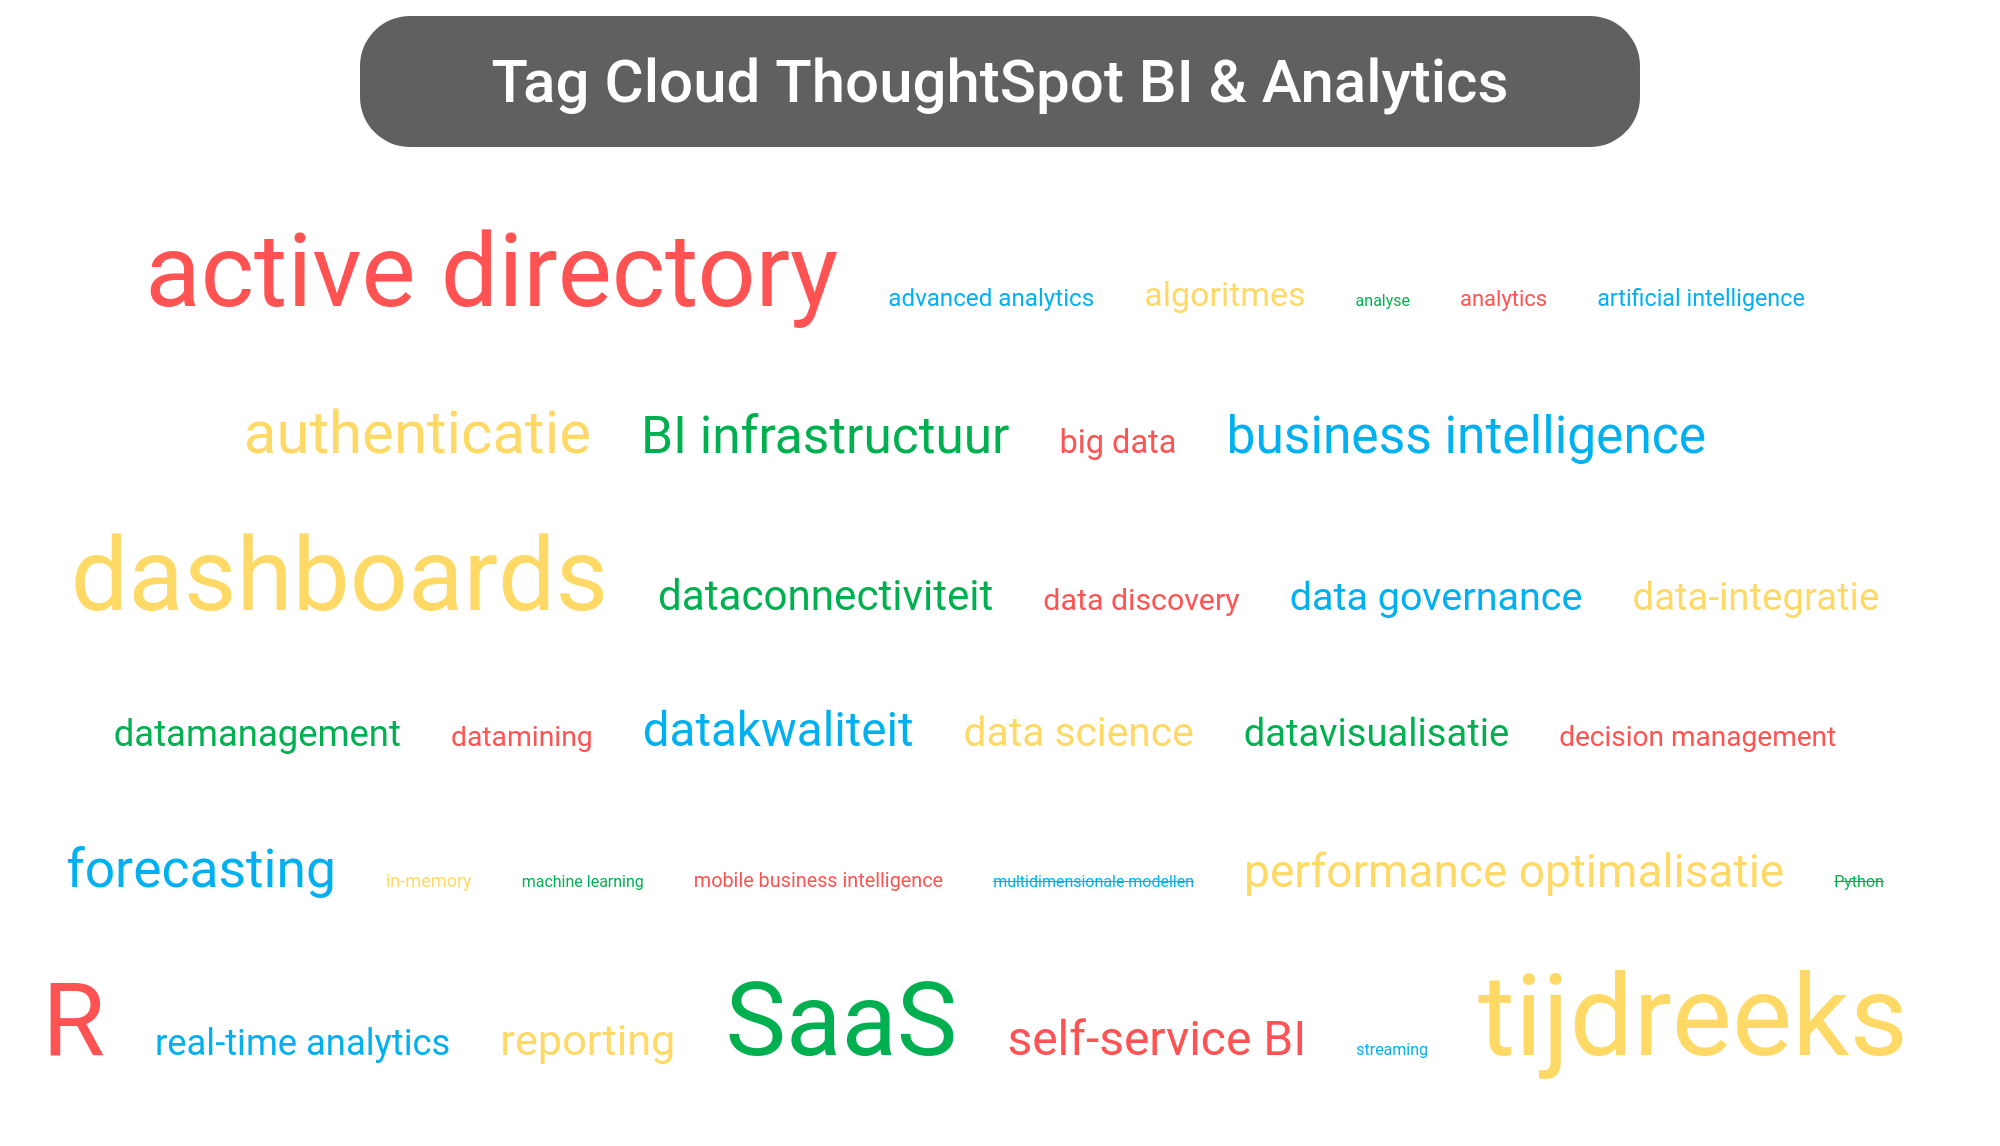 Tag cloud van ThoughtSpot Business Intelligence tools.